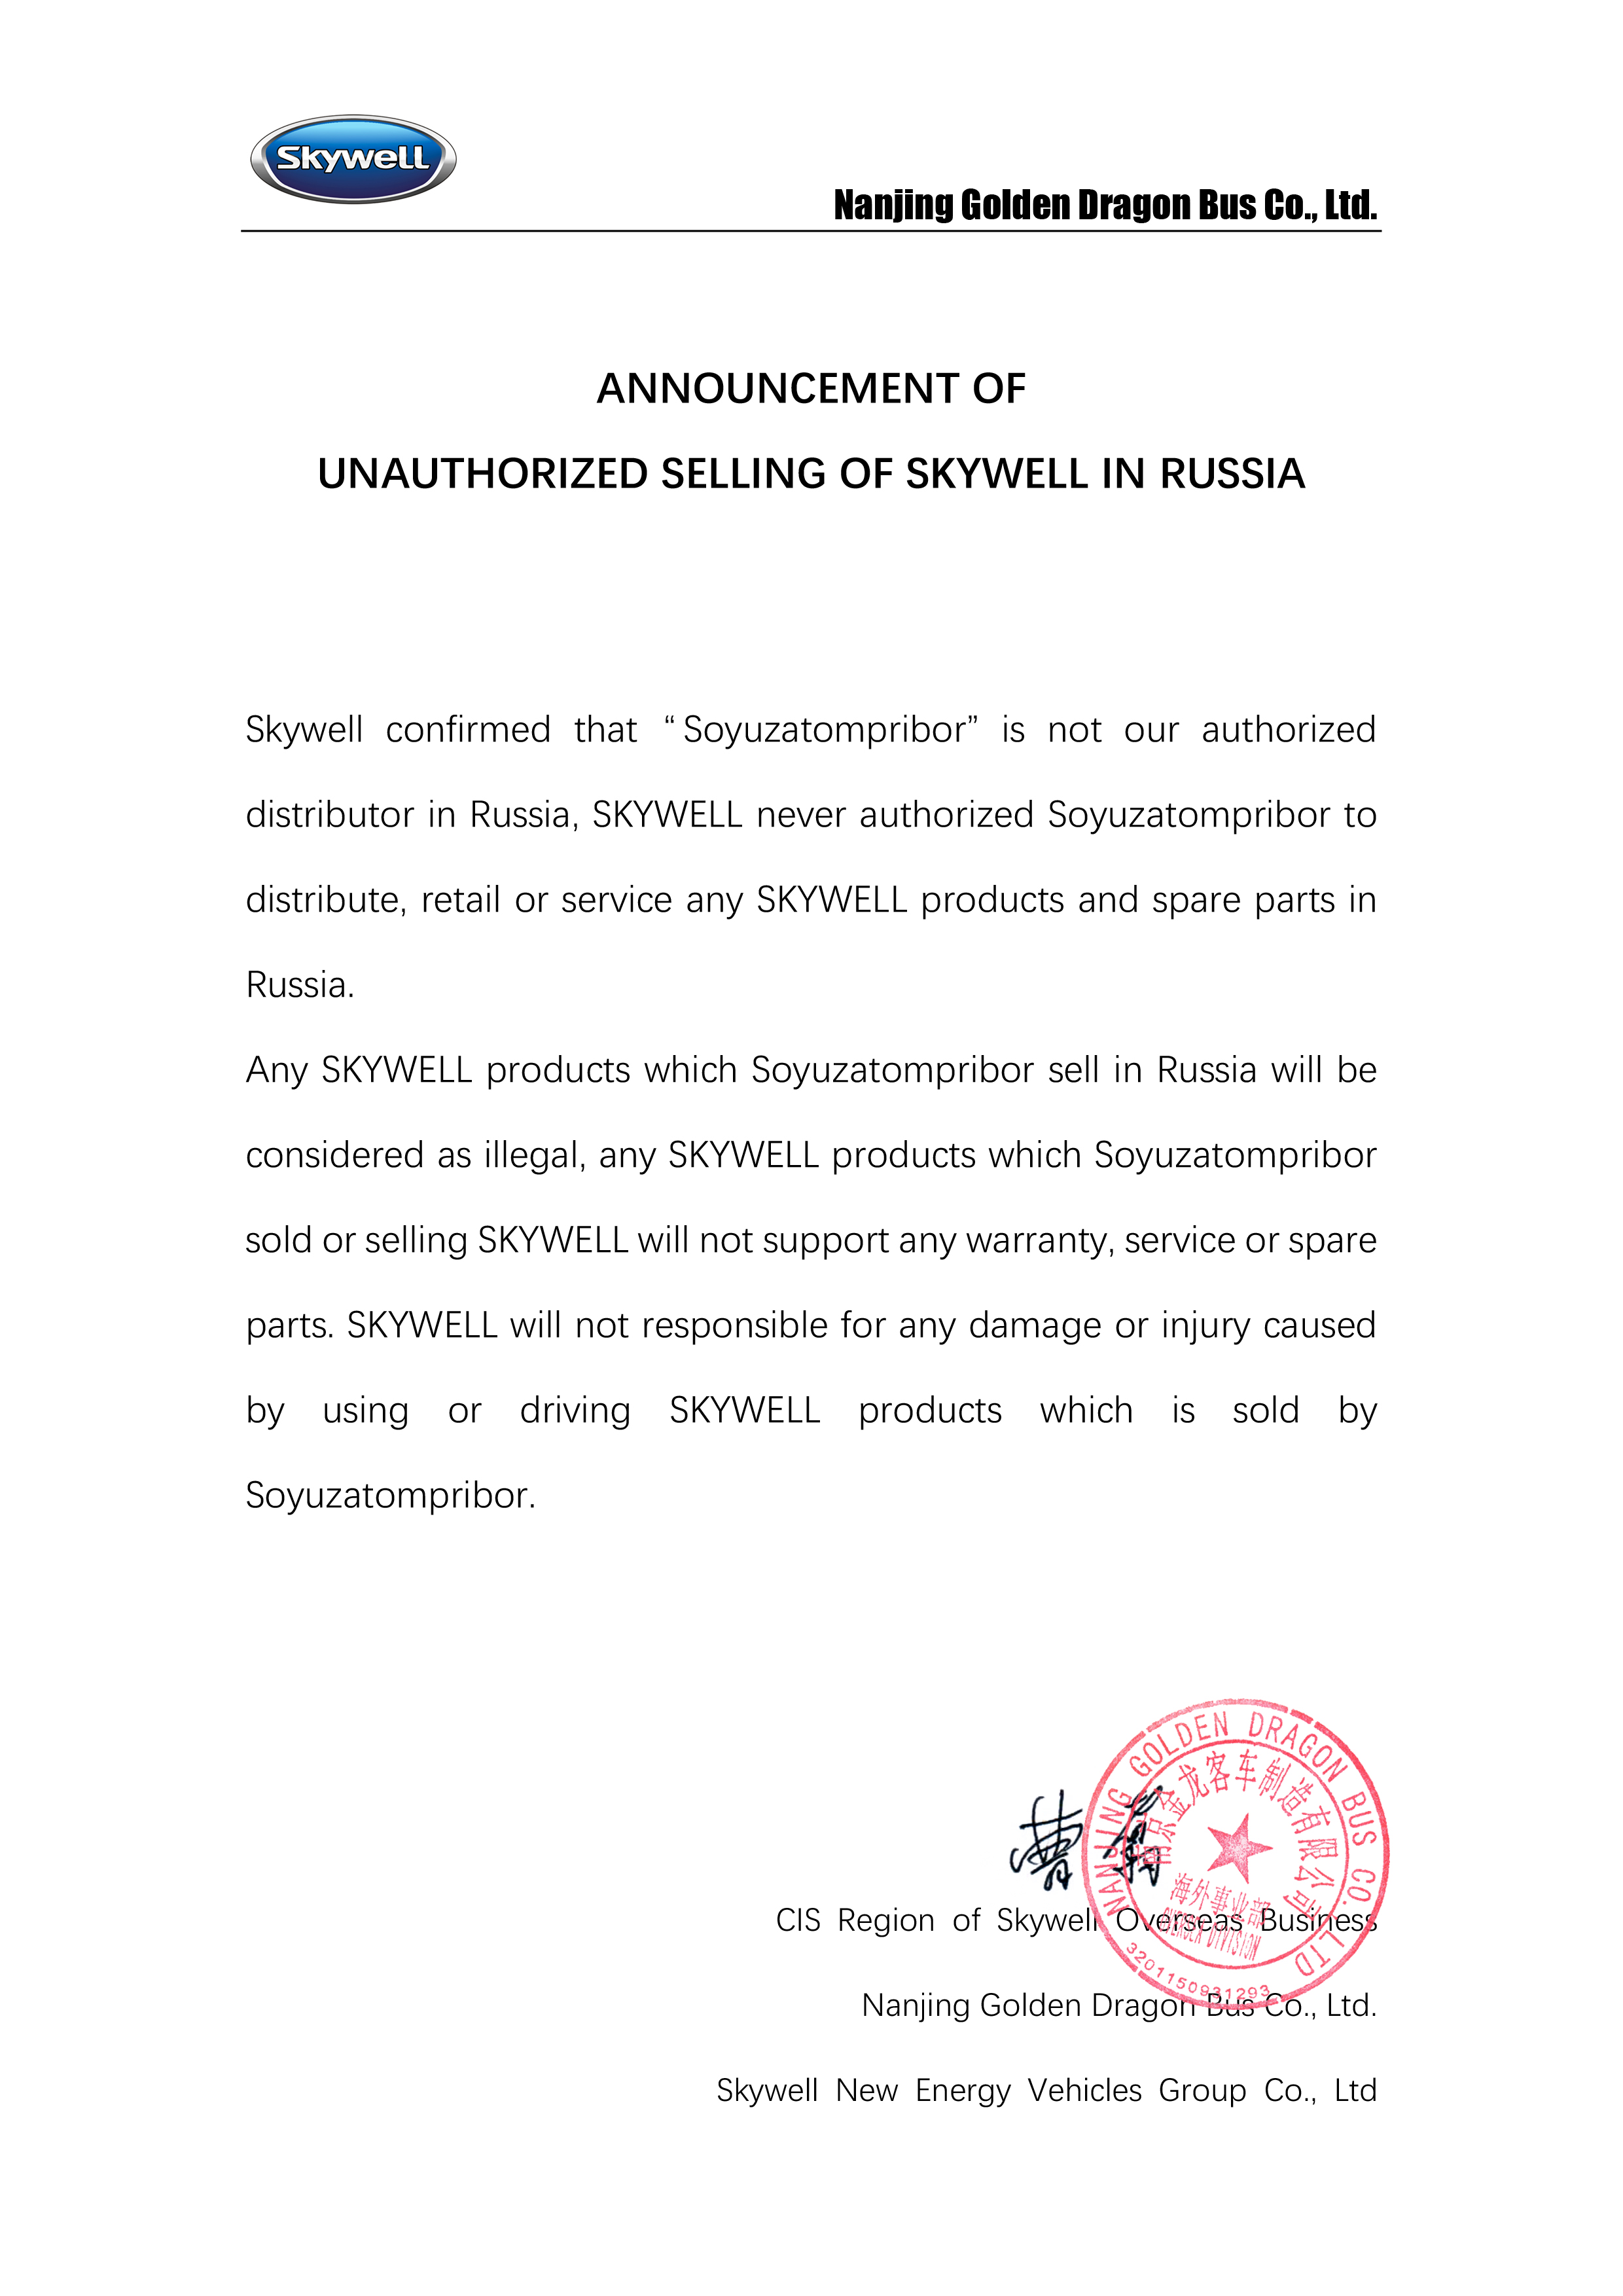 ANNOUNCEMENT OF UNAUTHORIZED SELLING OF SKYWELL IN RUSSIA.jpg